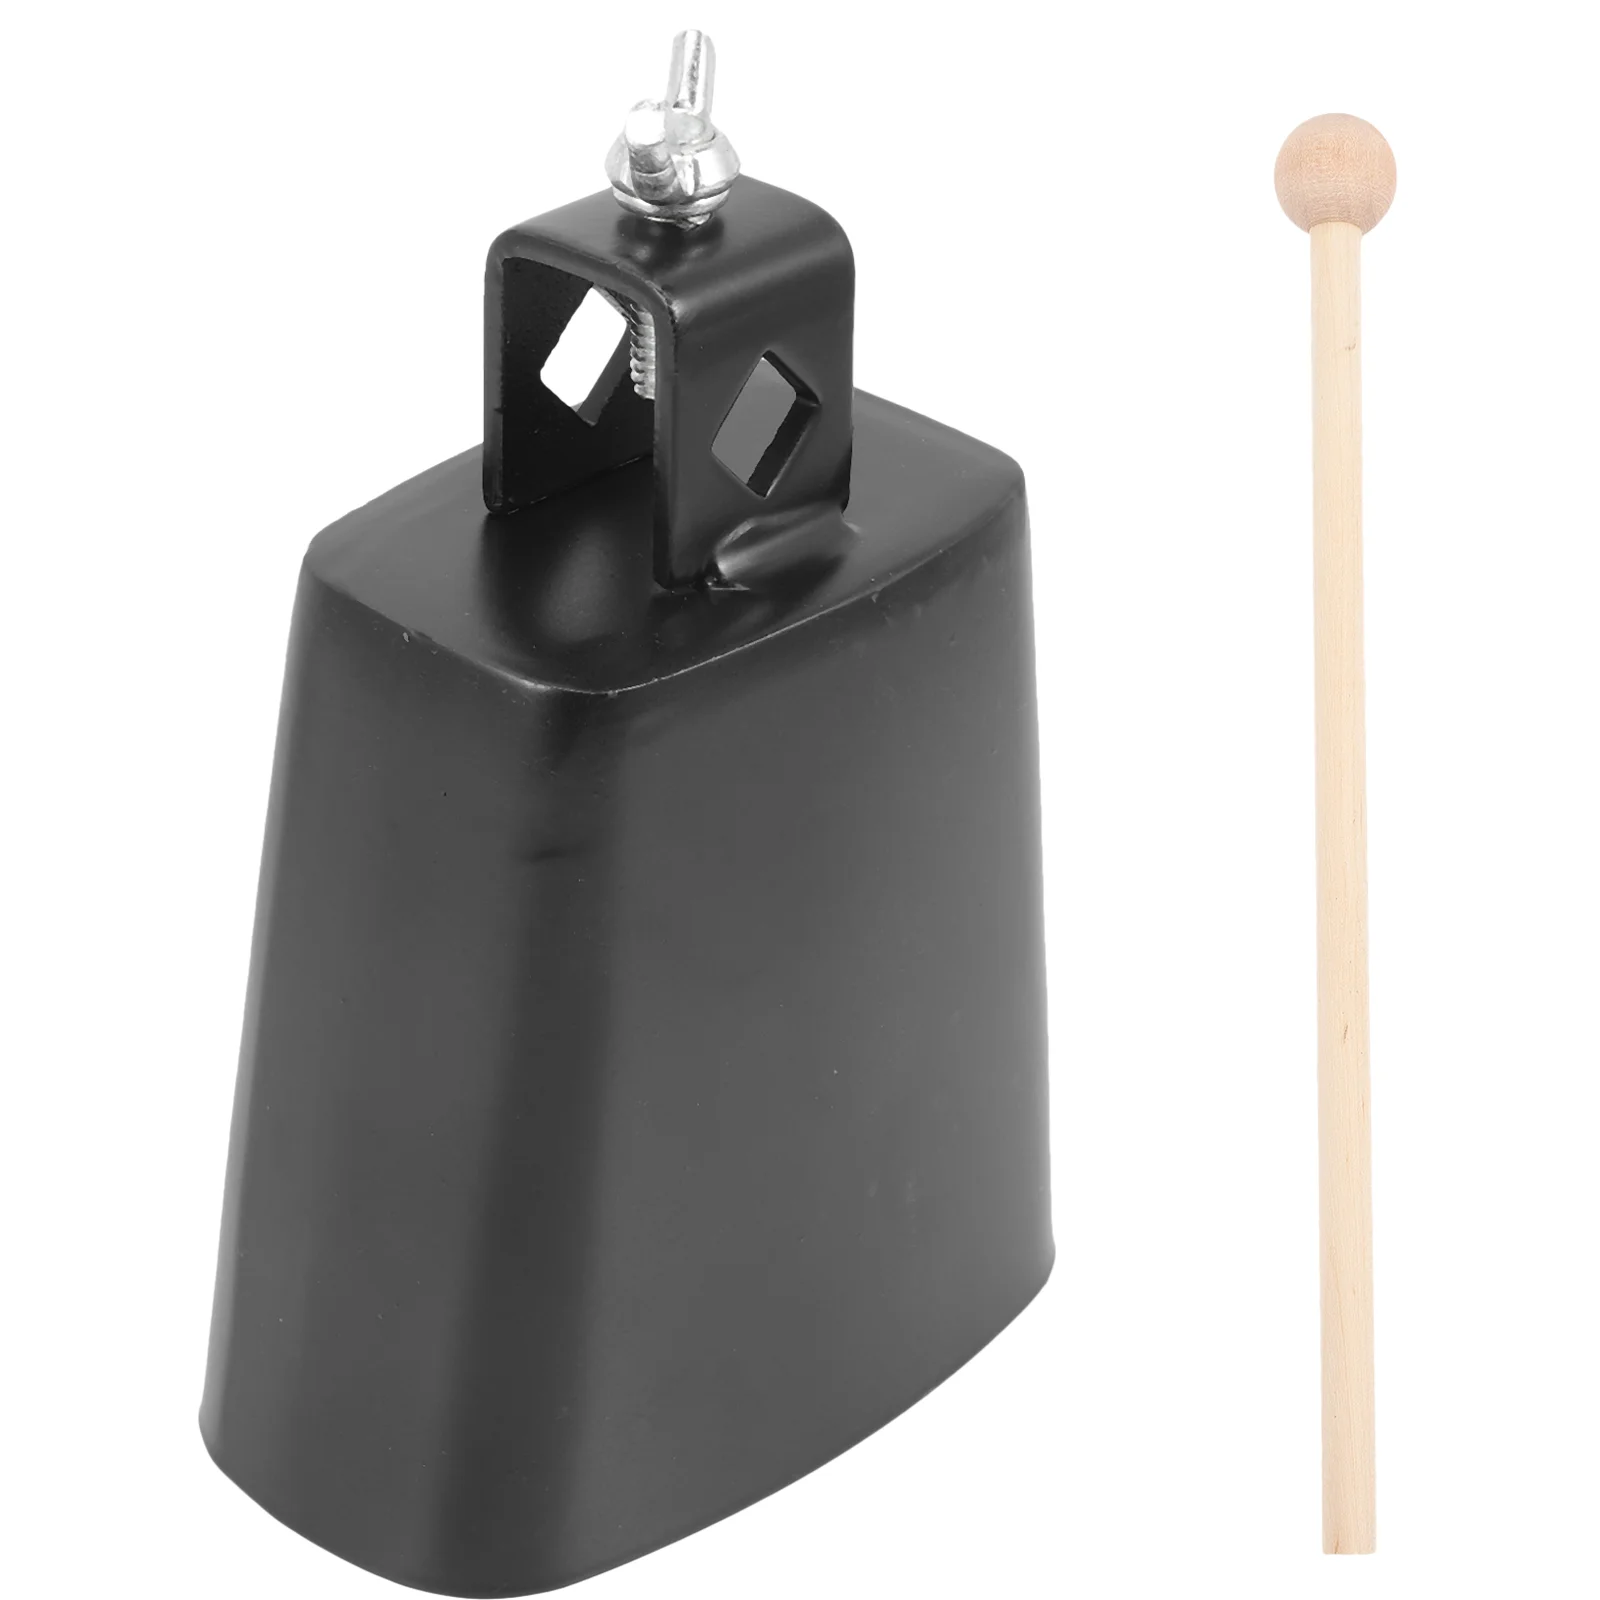 

Kidcraft Playset Cow Bell Percussion Cowbells The Kids Musical Toy Instrument Child